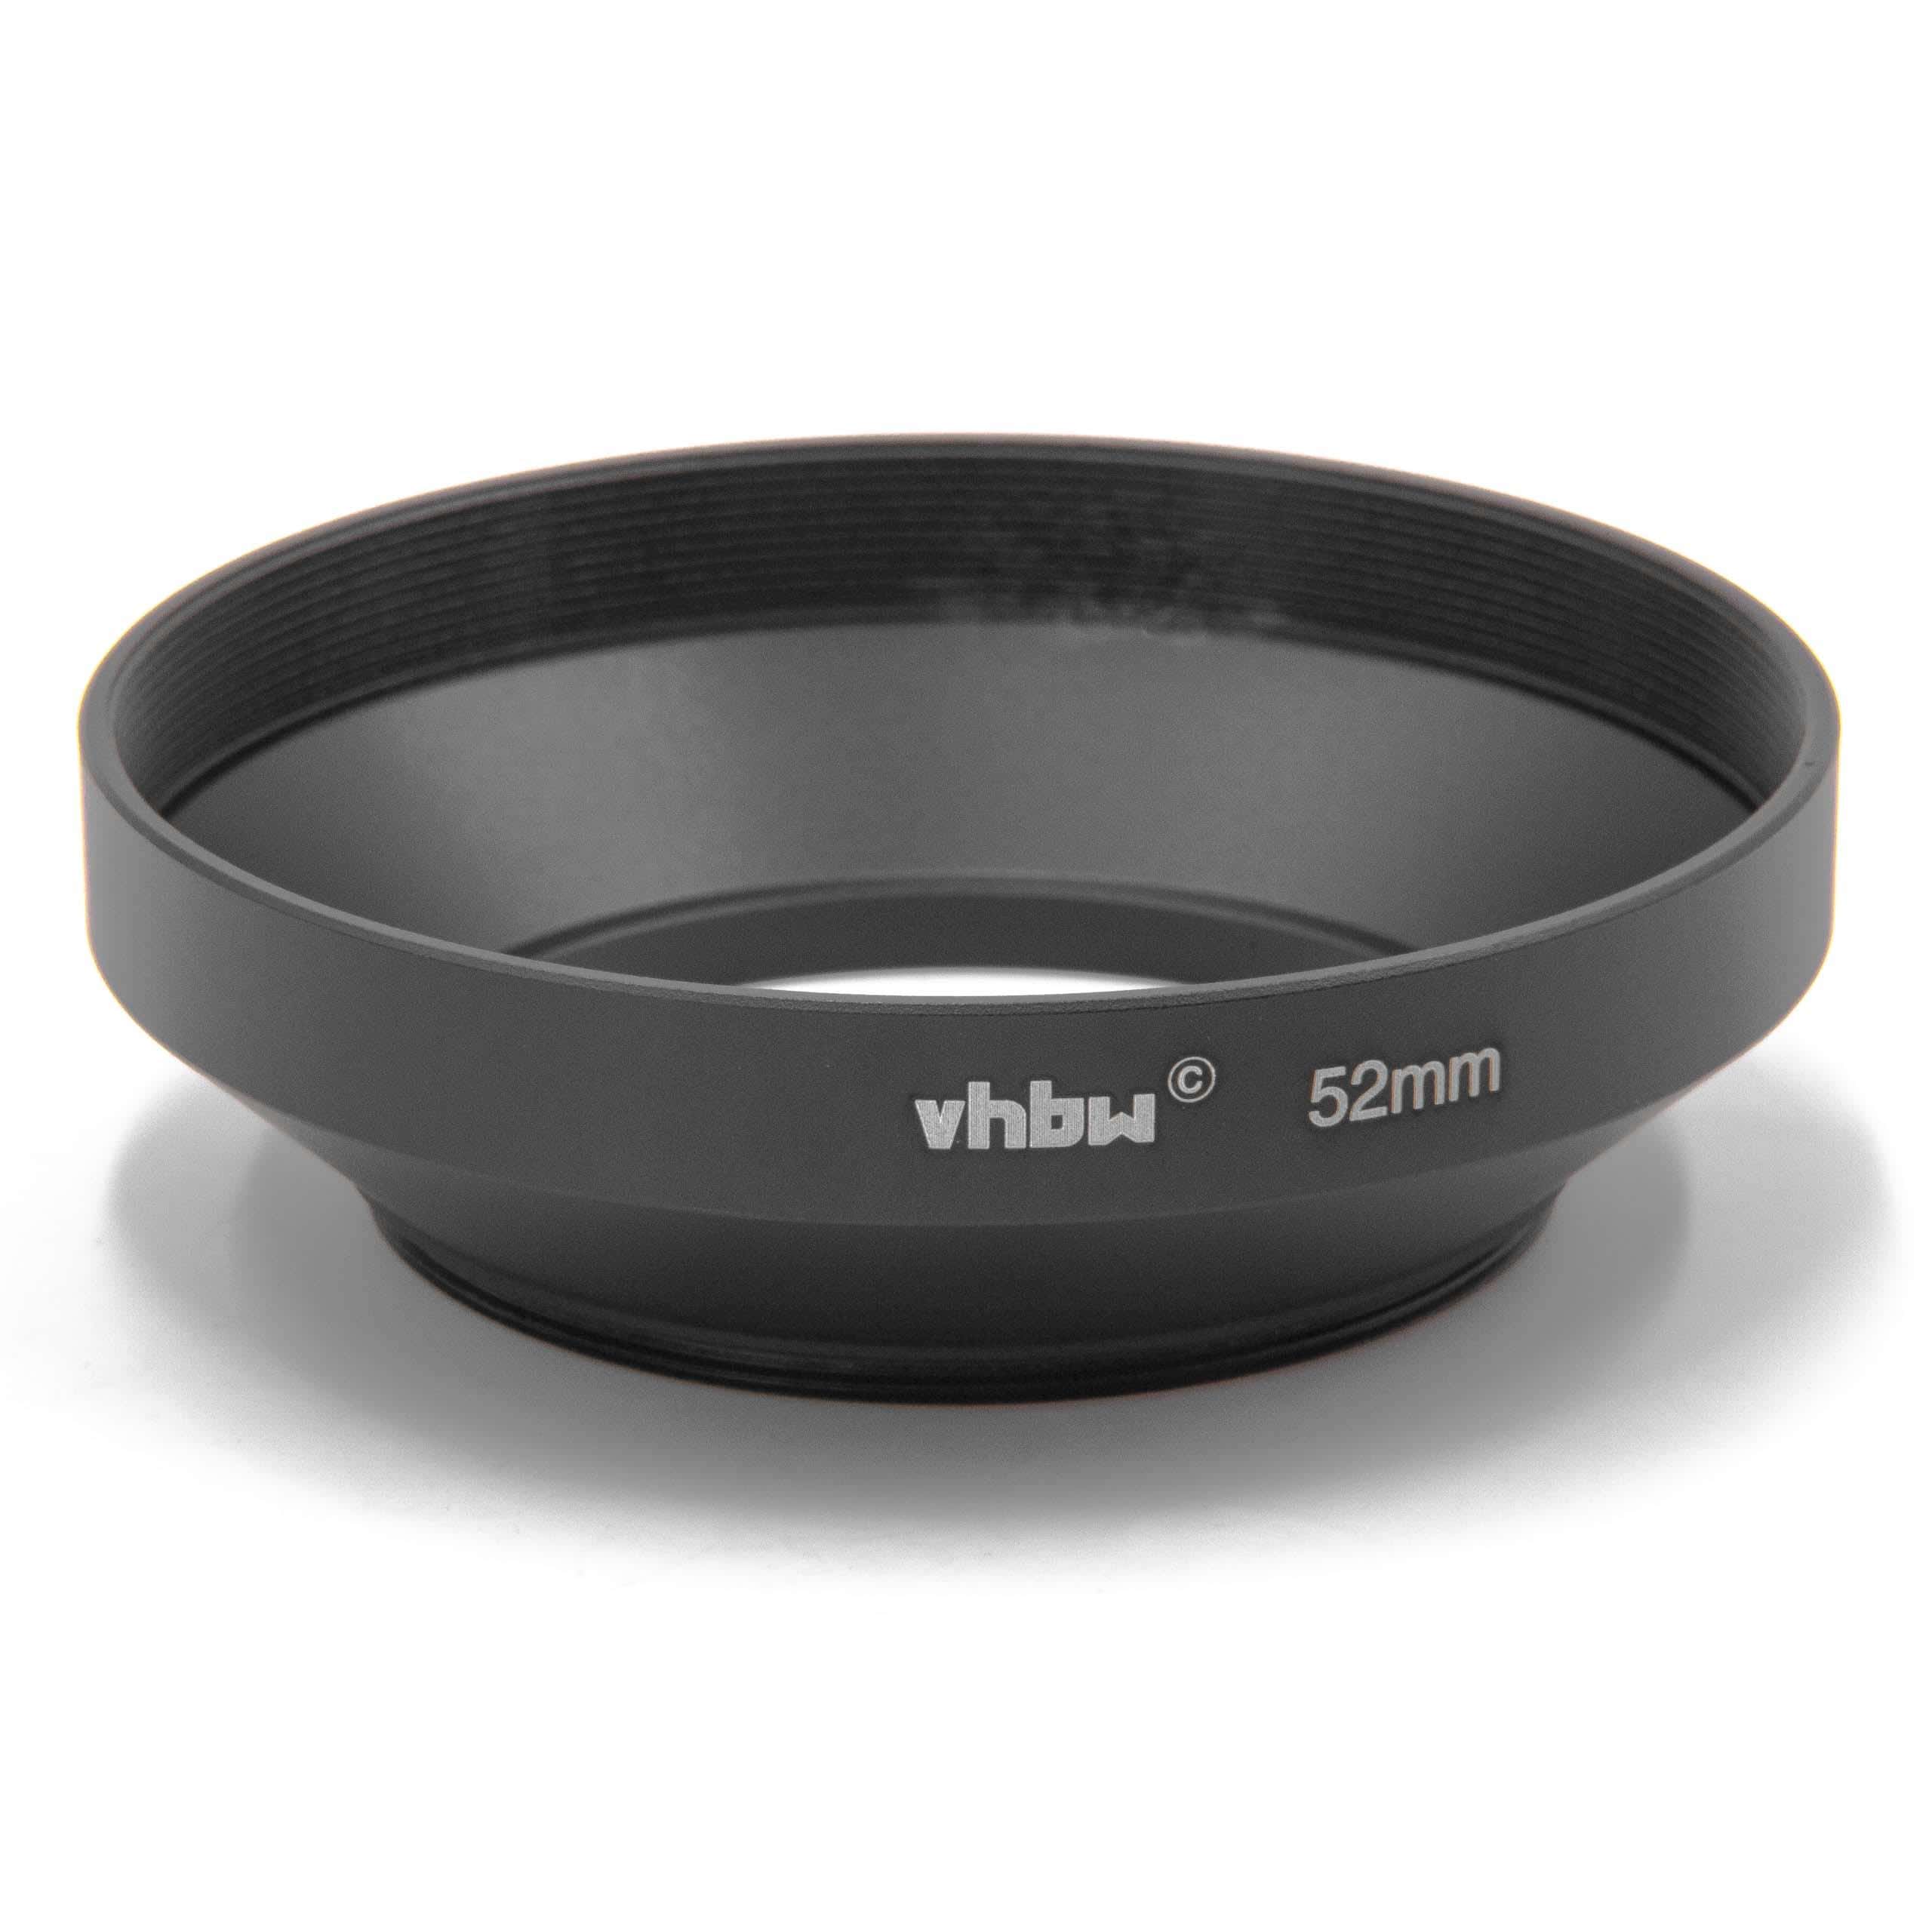 Lens Hood suitable for 52mm Lens - Wide-Angle Lens Shade Black, Round